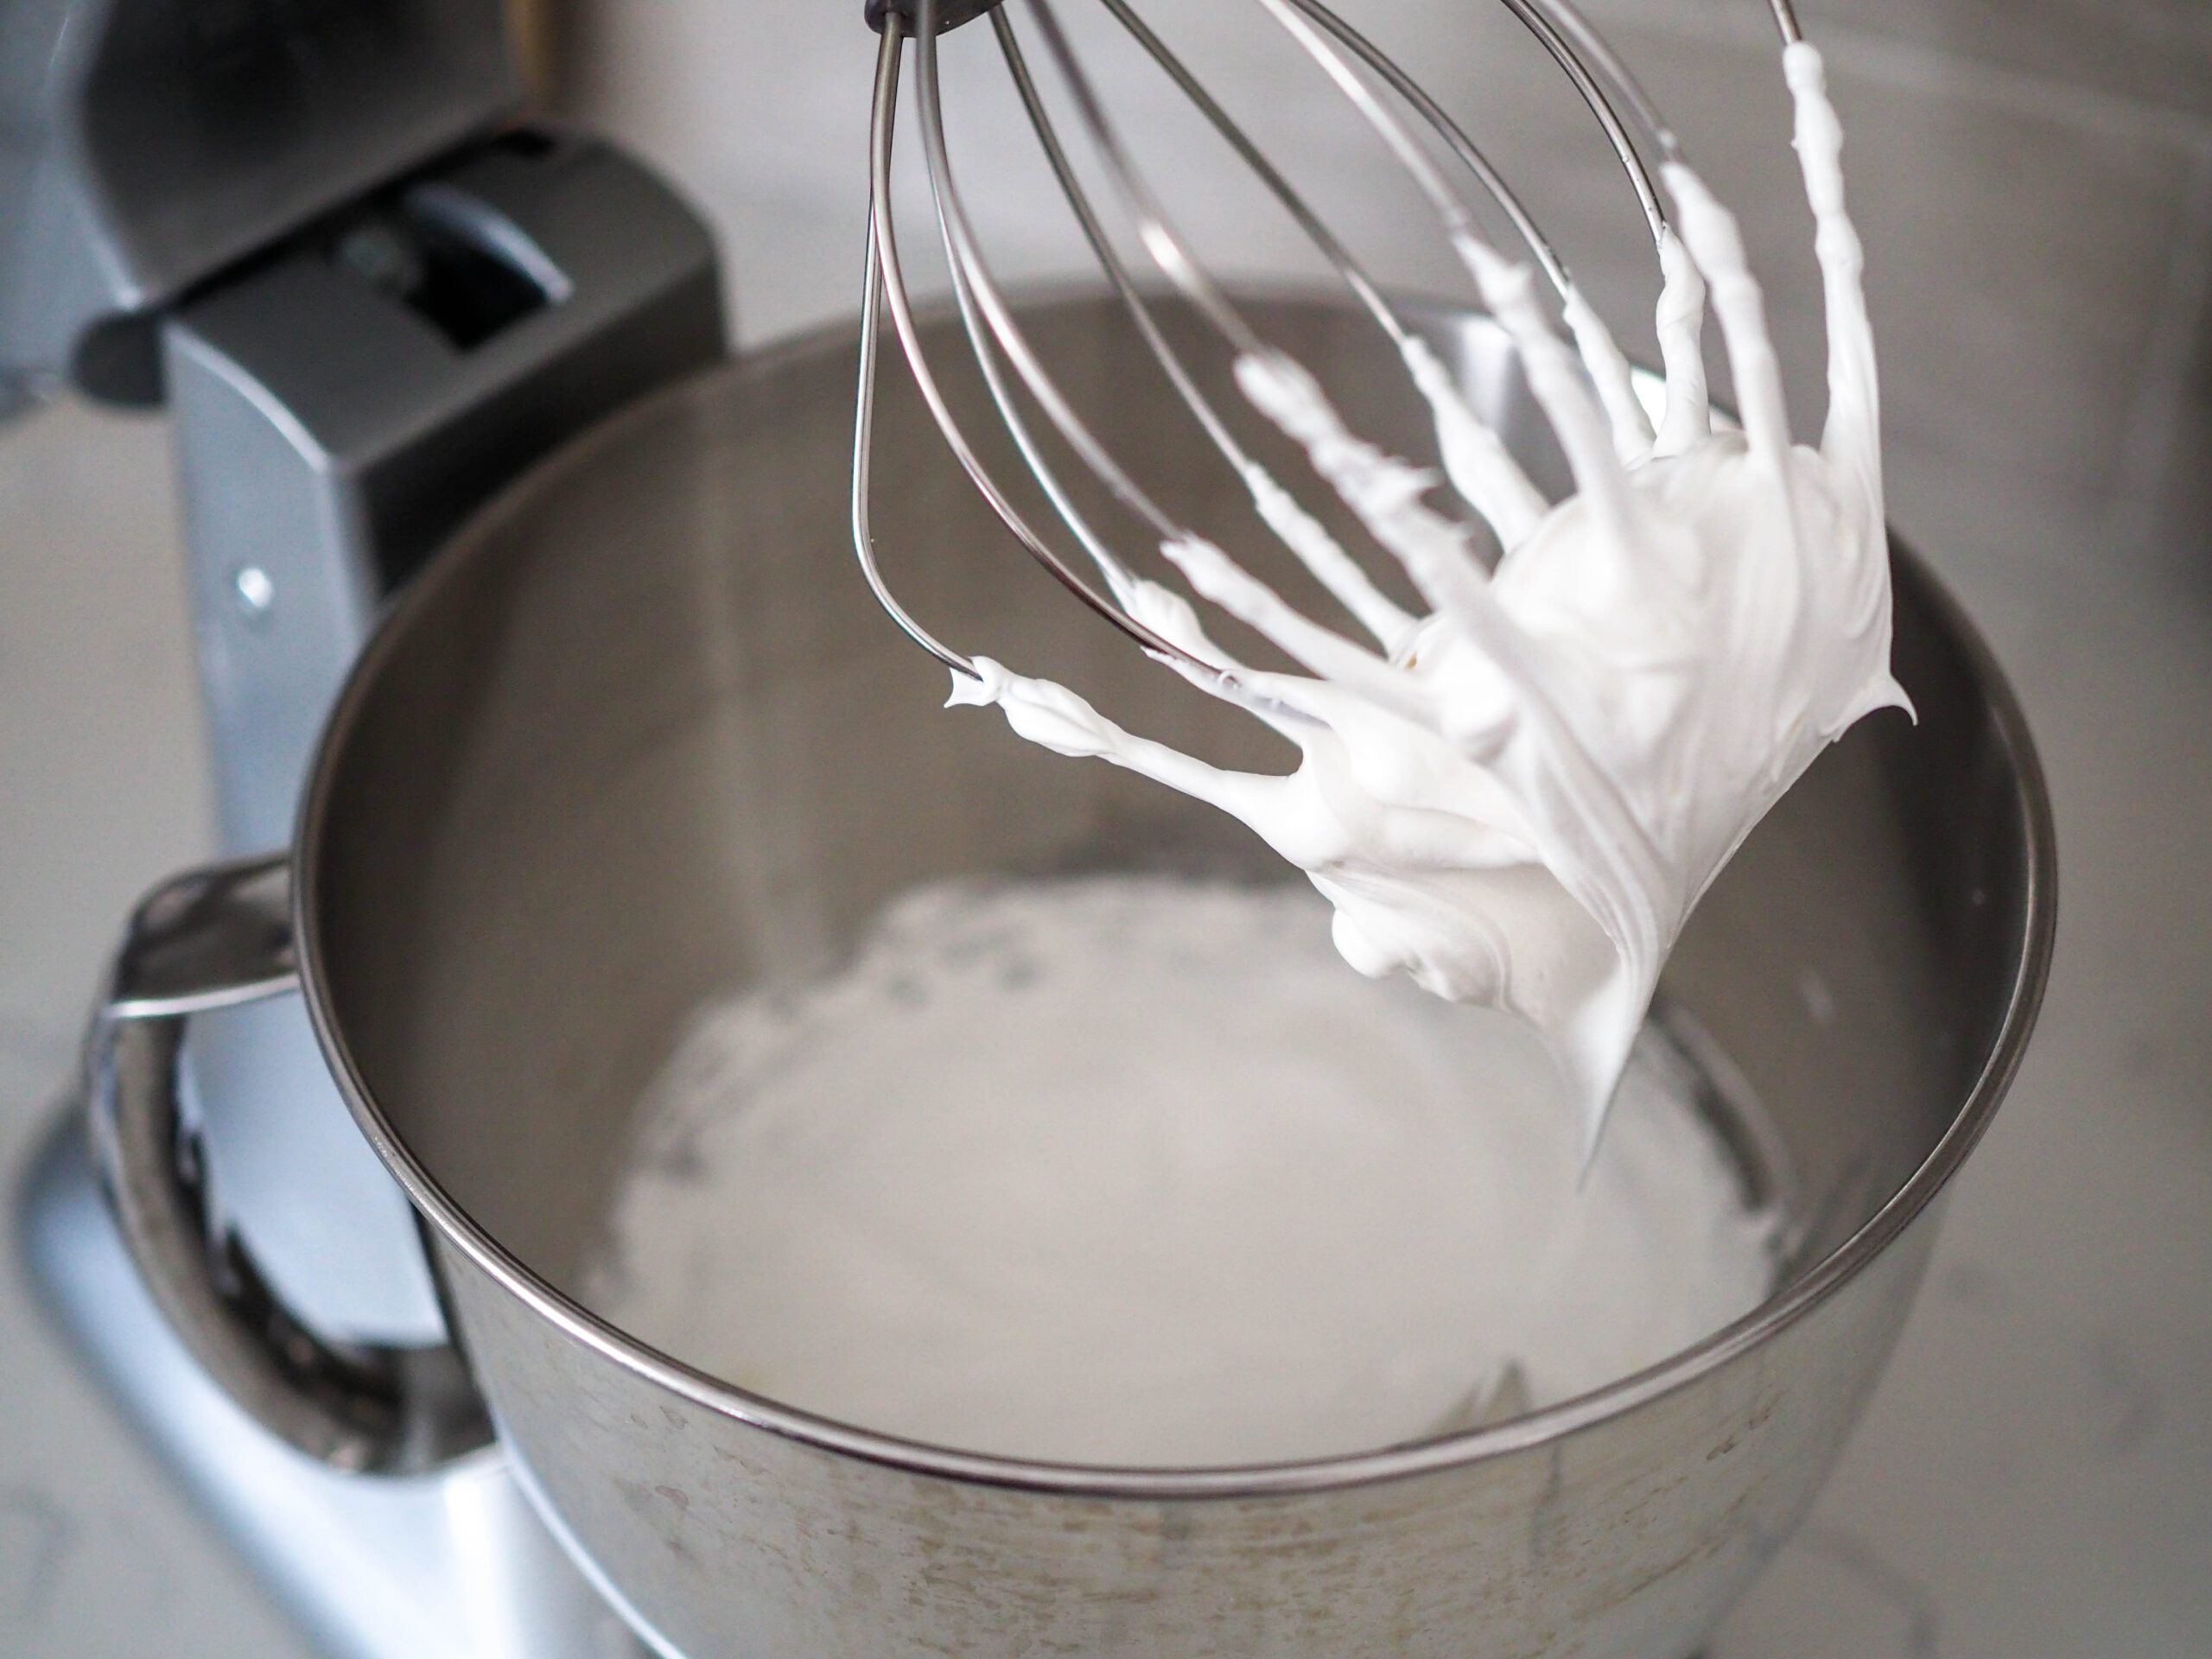 Swiss meringue clumped around the whisk attachment of a stand mixer.